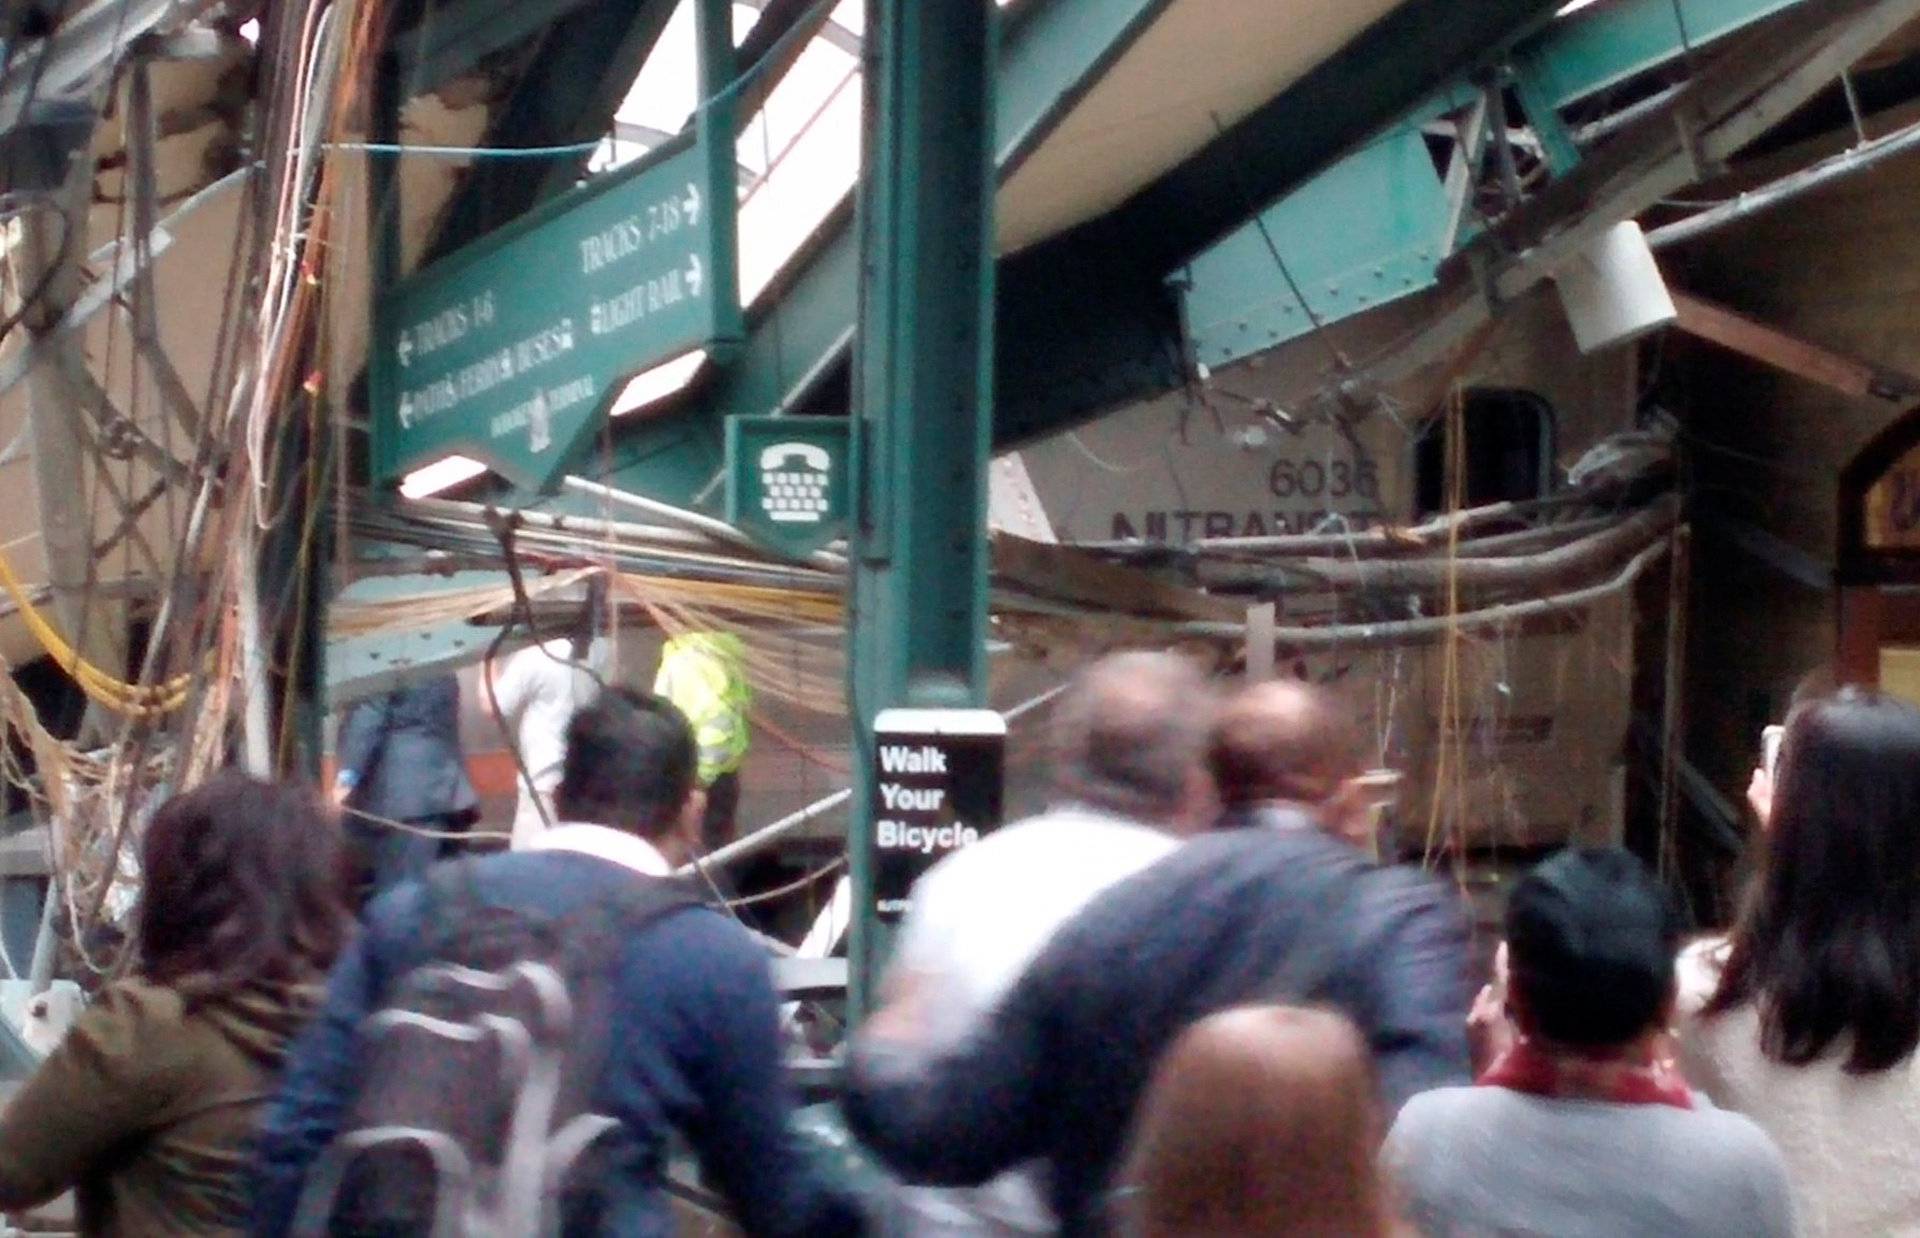 Onlookers view a New Jersey Transit train that derailed and crashed through the station in Hoboken, New Jersey, 